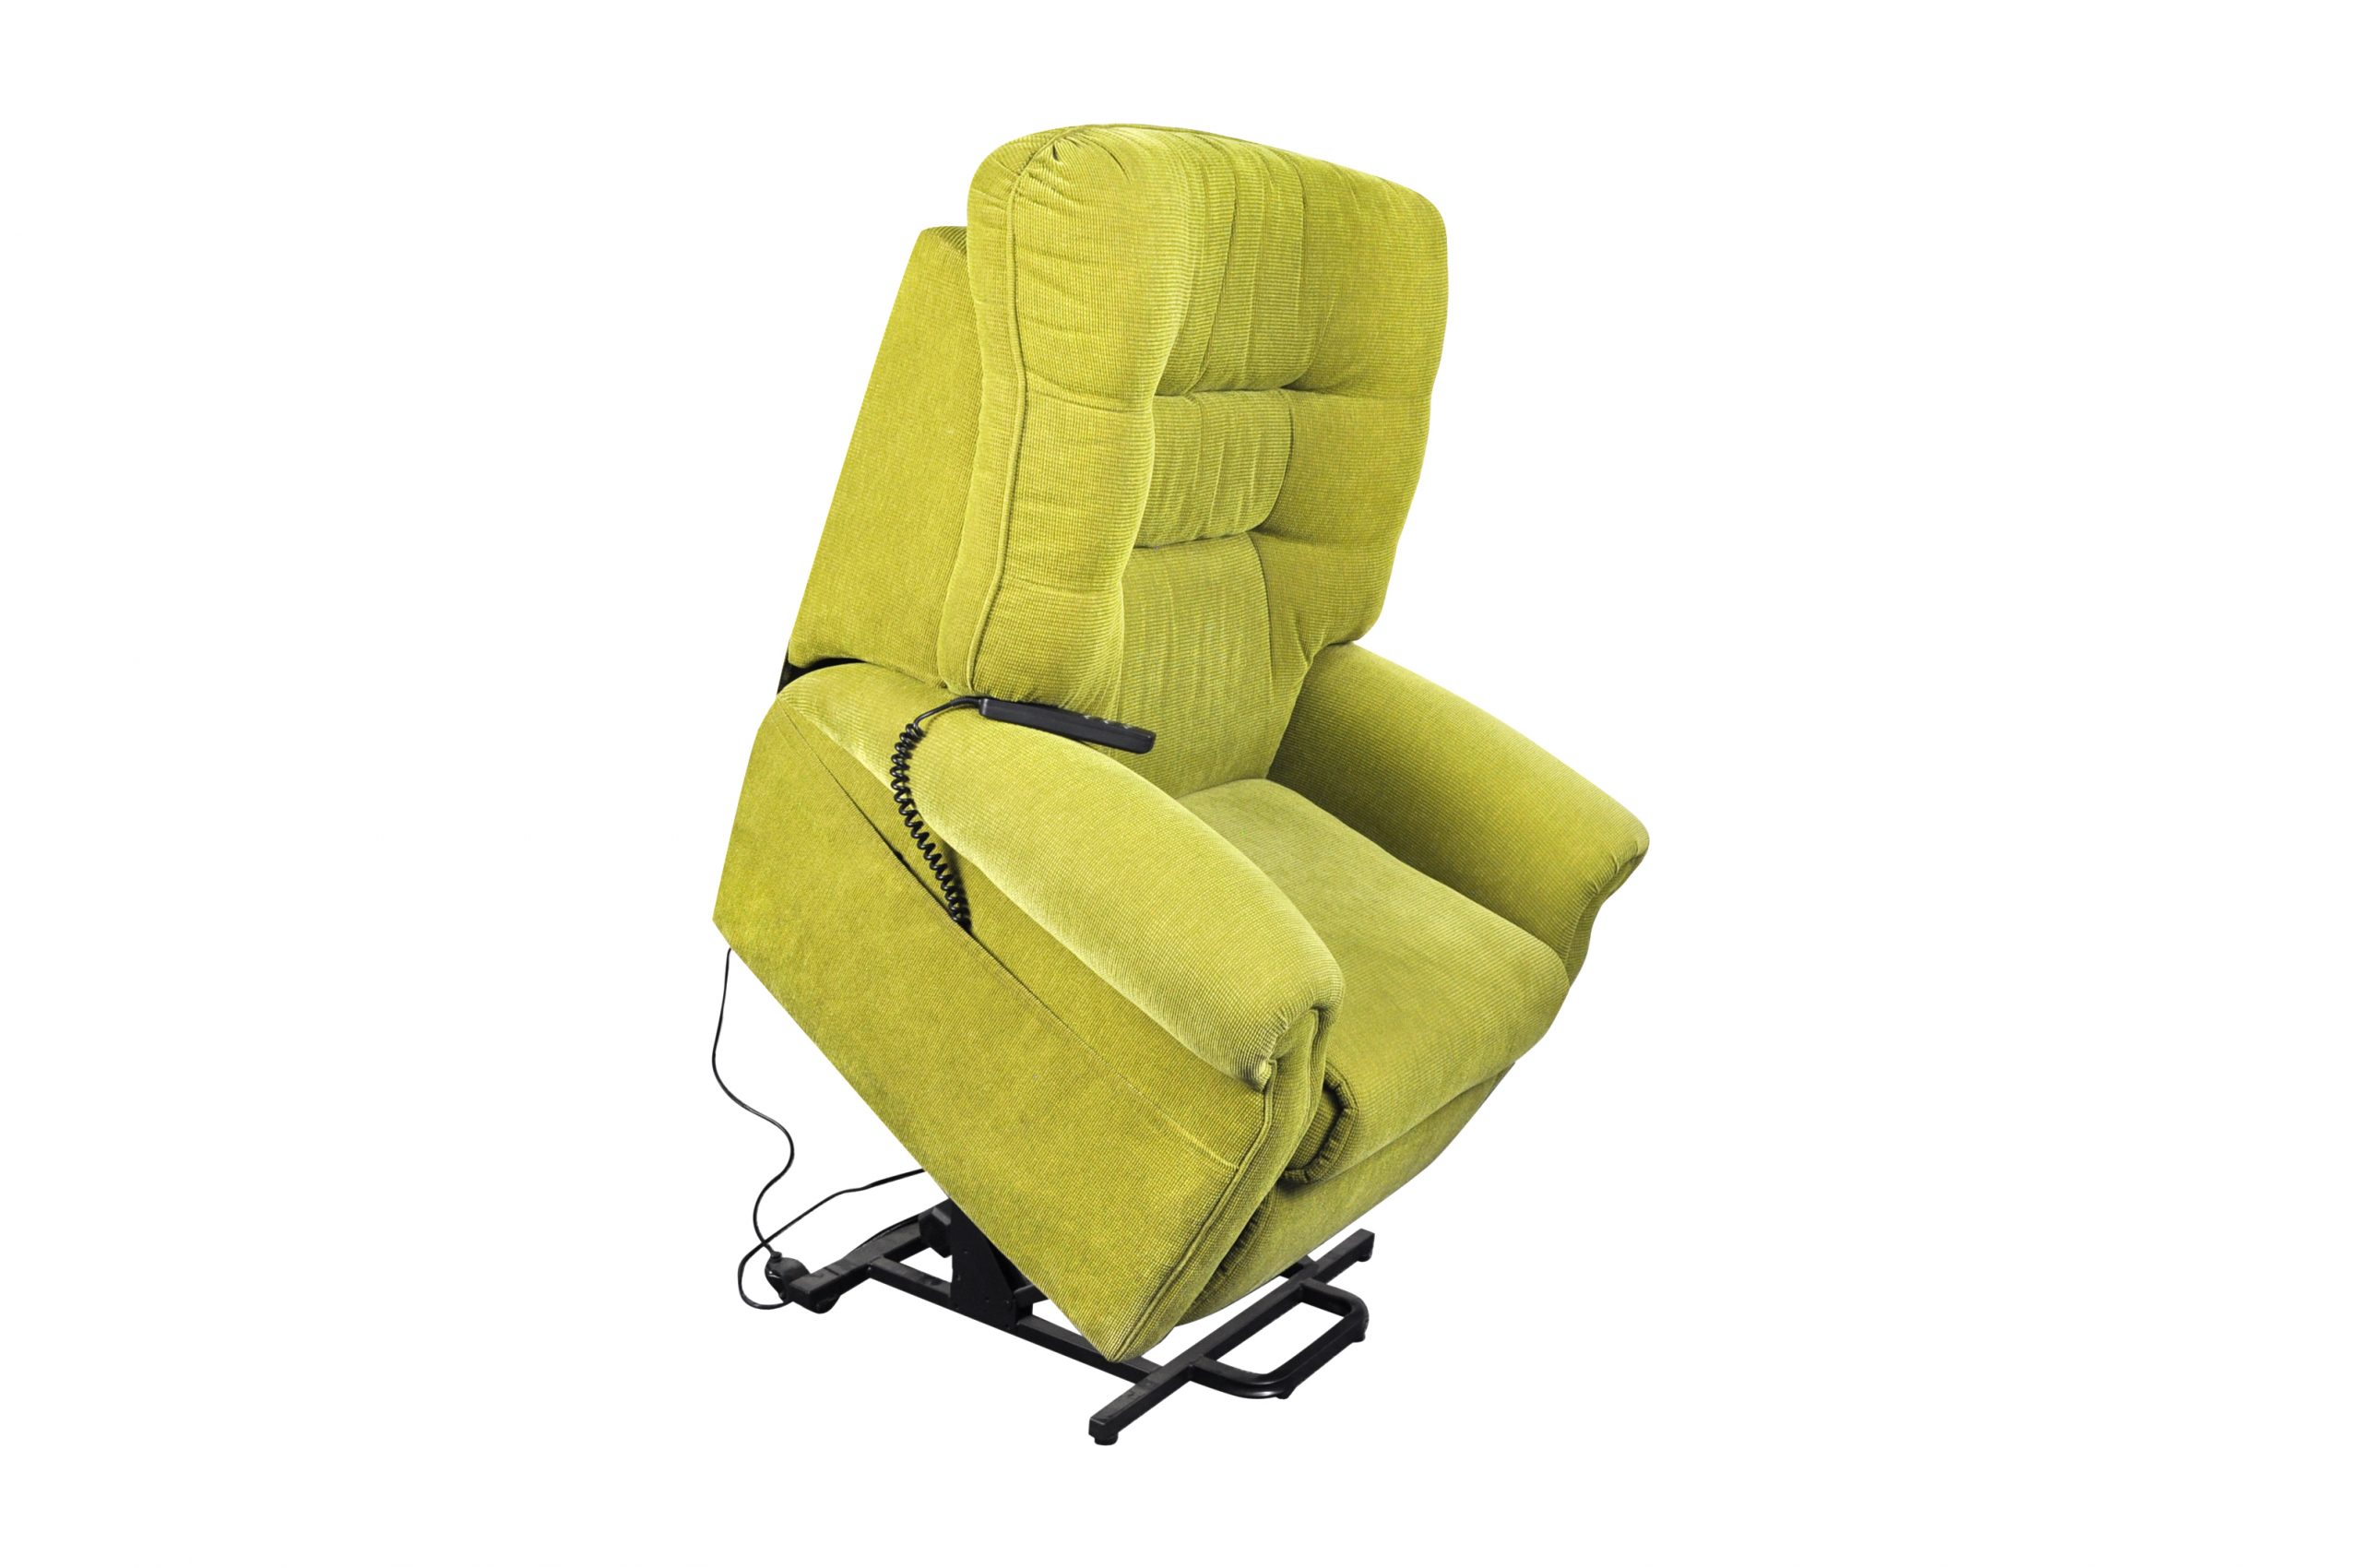 Bluesky Mobility Bardot – Lift Only Chair (Large)